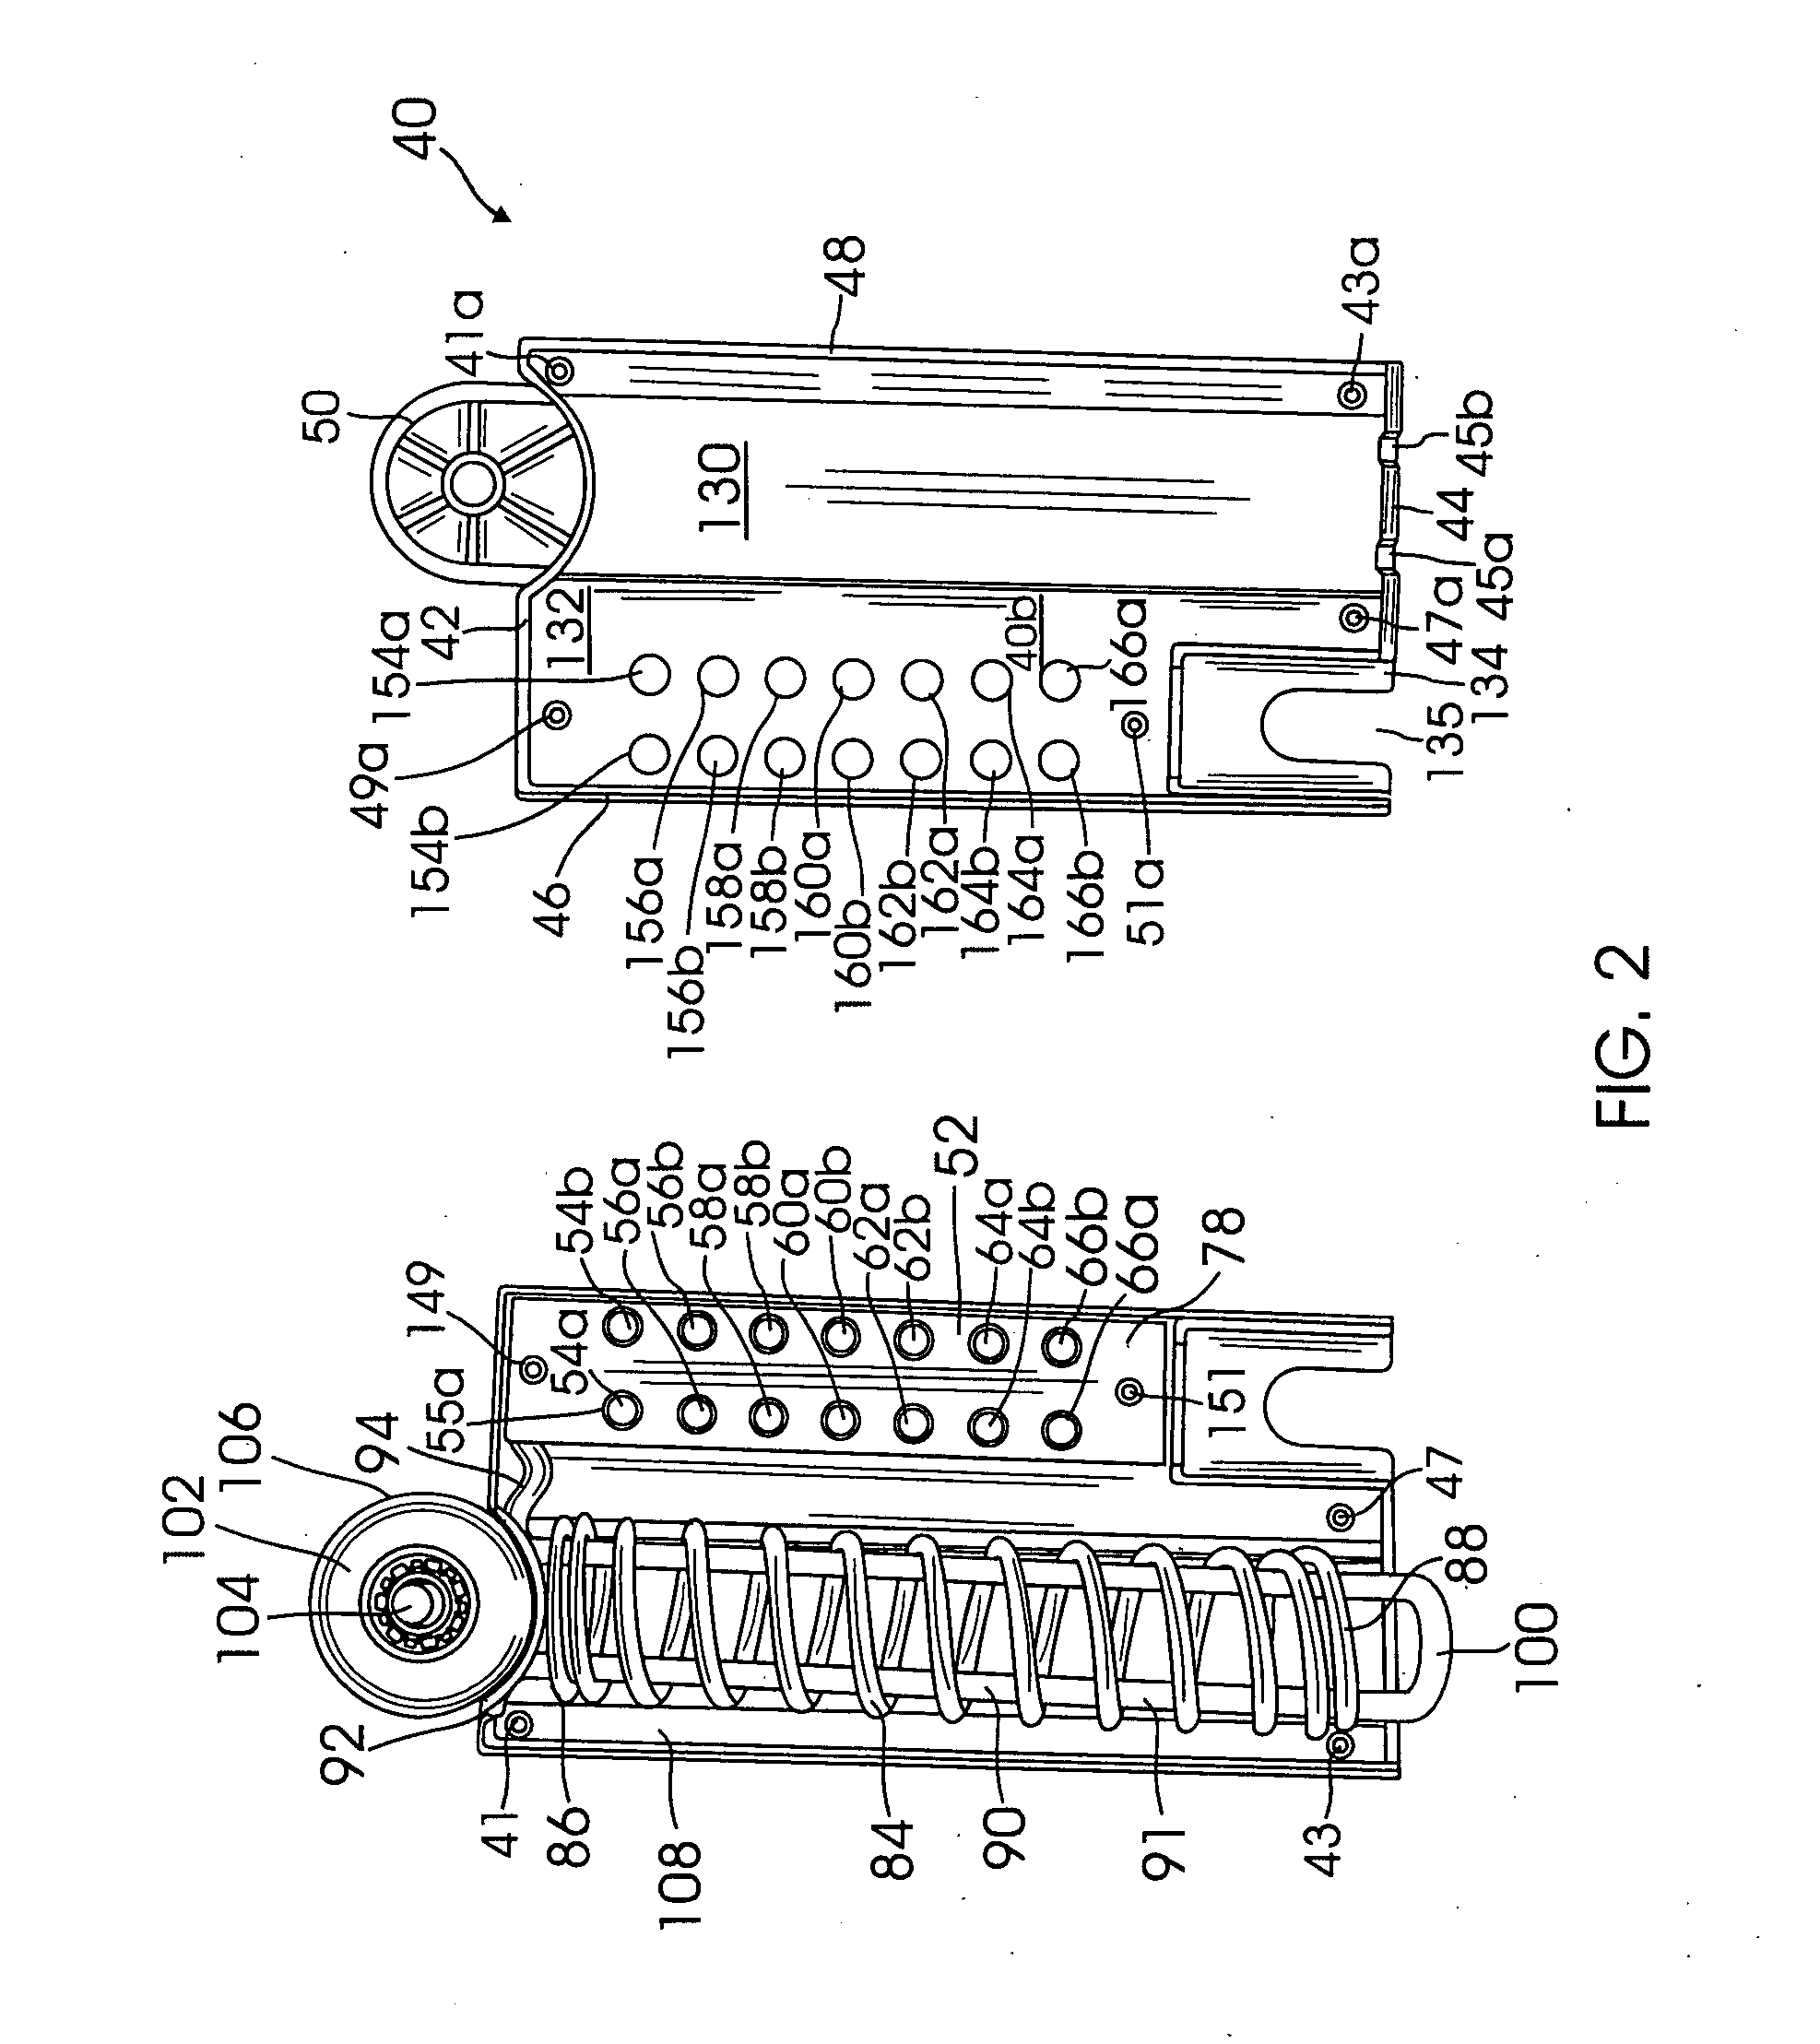 Portable isometric exercise device with resistance generated by a spring force, including an electronic light or sound indicator to signal that a constant force level is being maintained